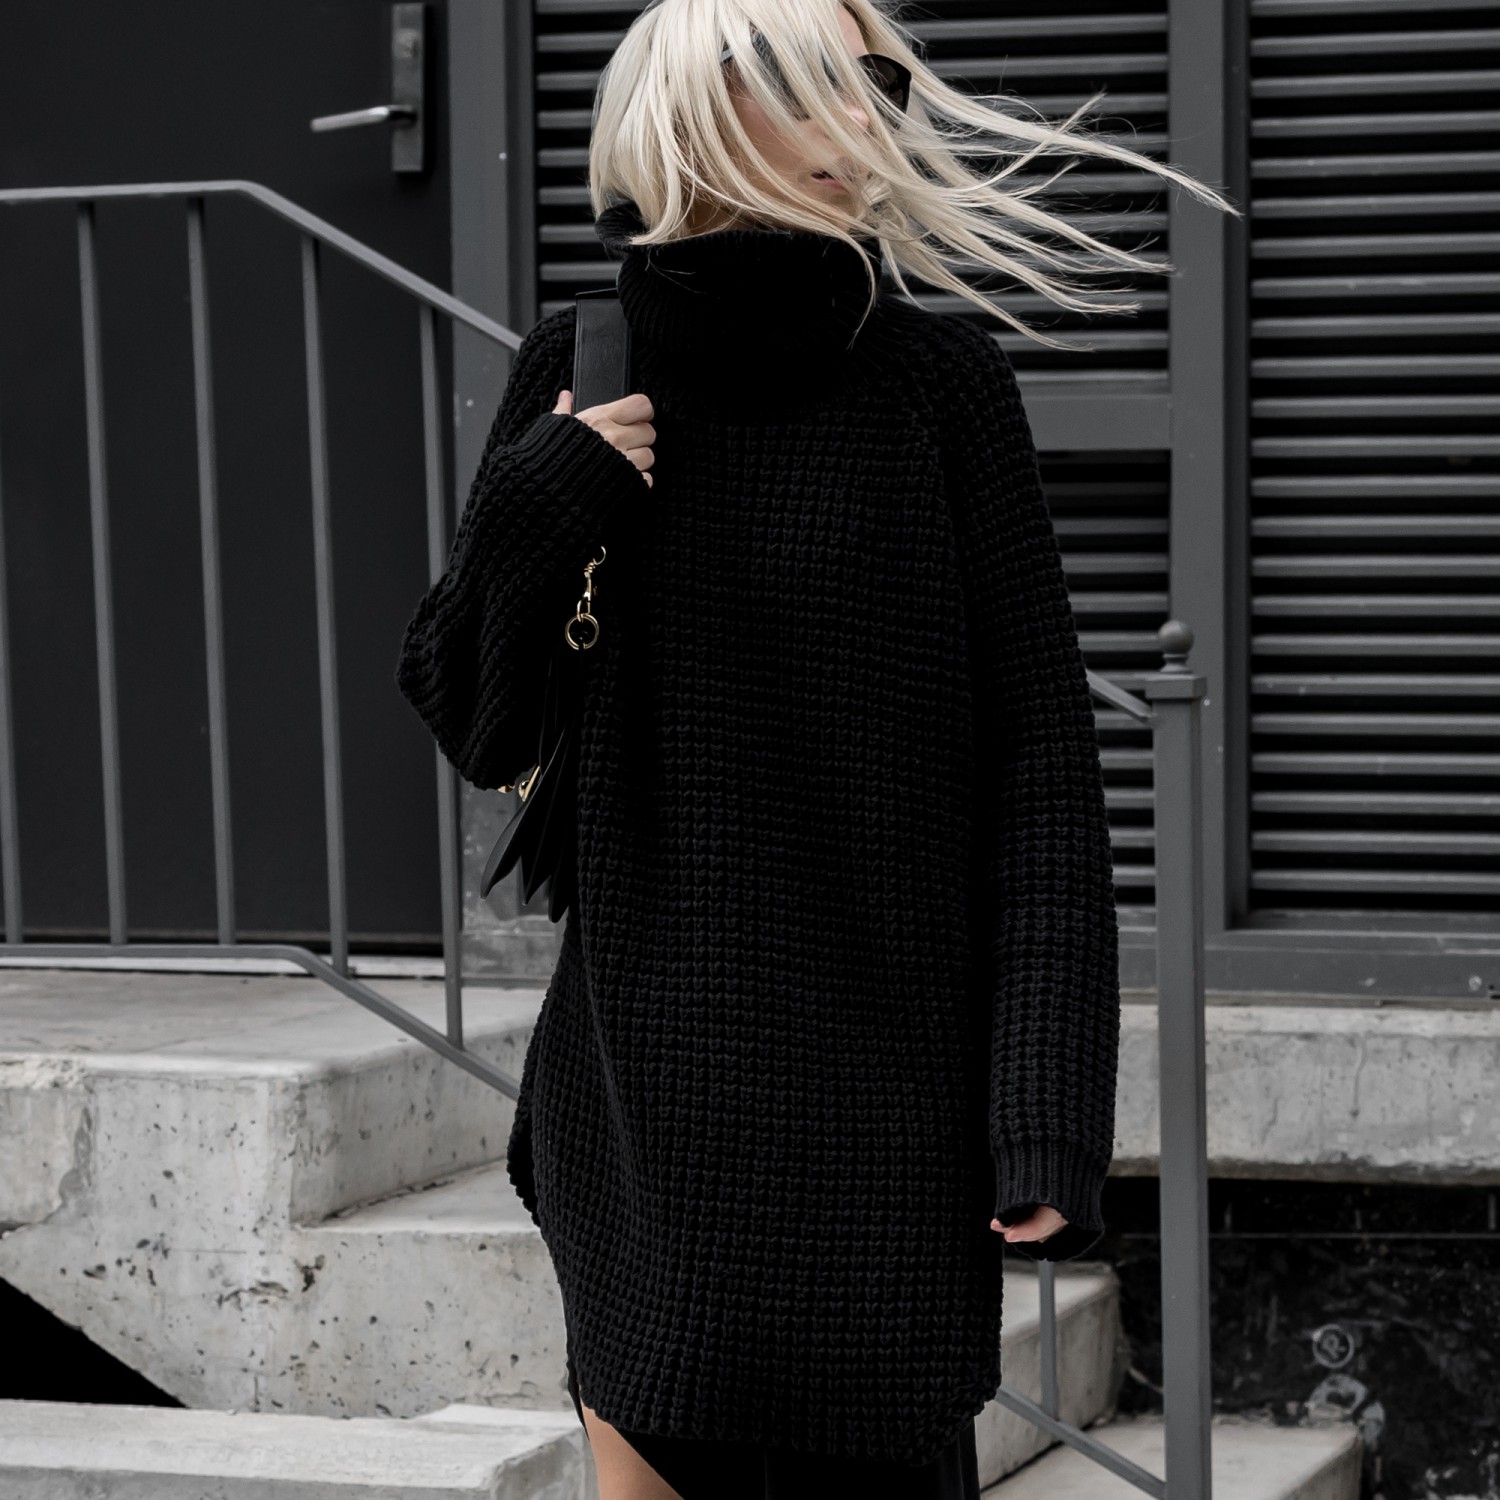 figtny.com | Slit Skirts + Sweaters + Sneakers